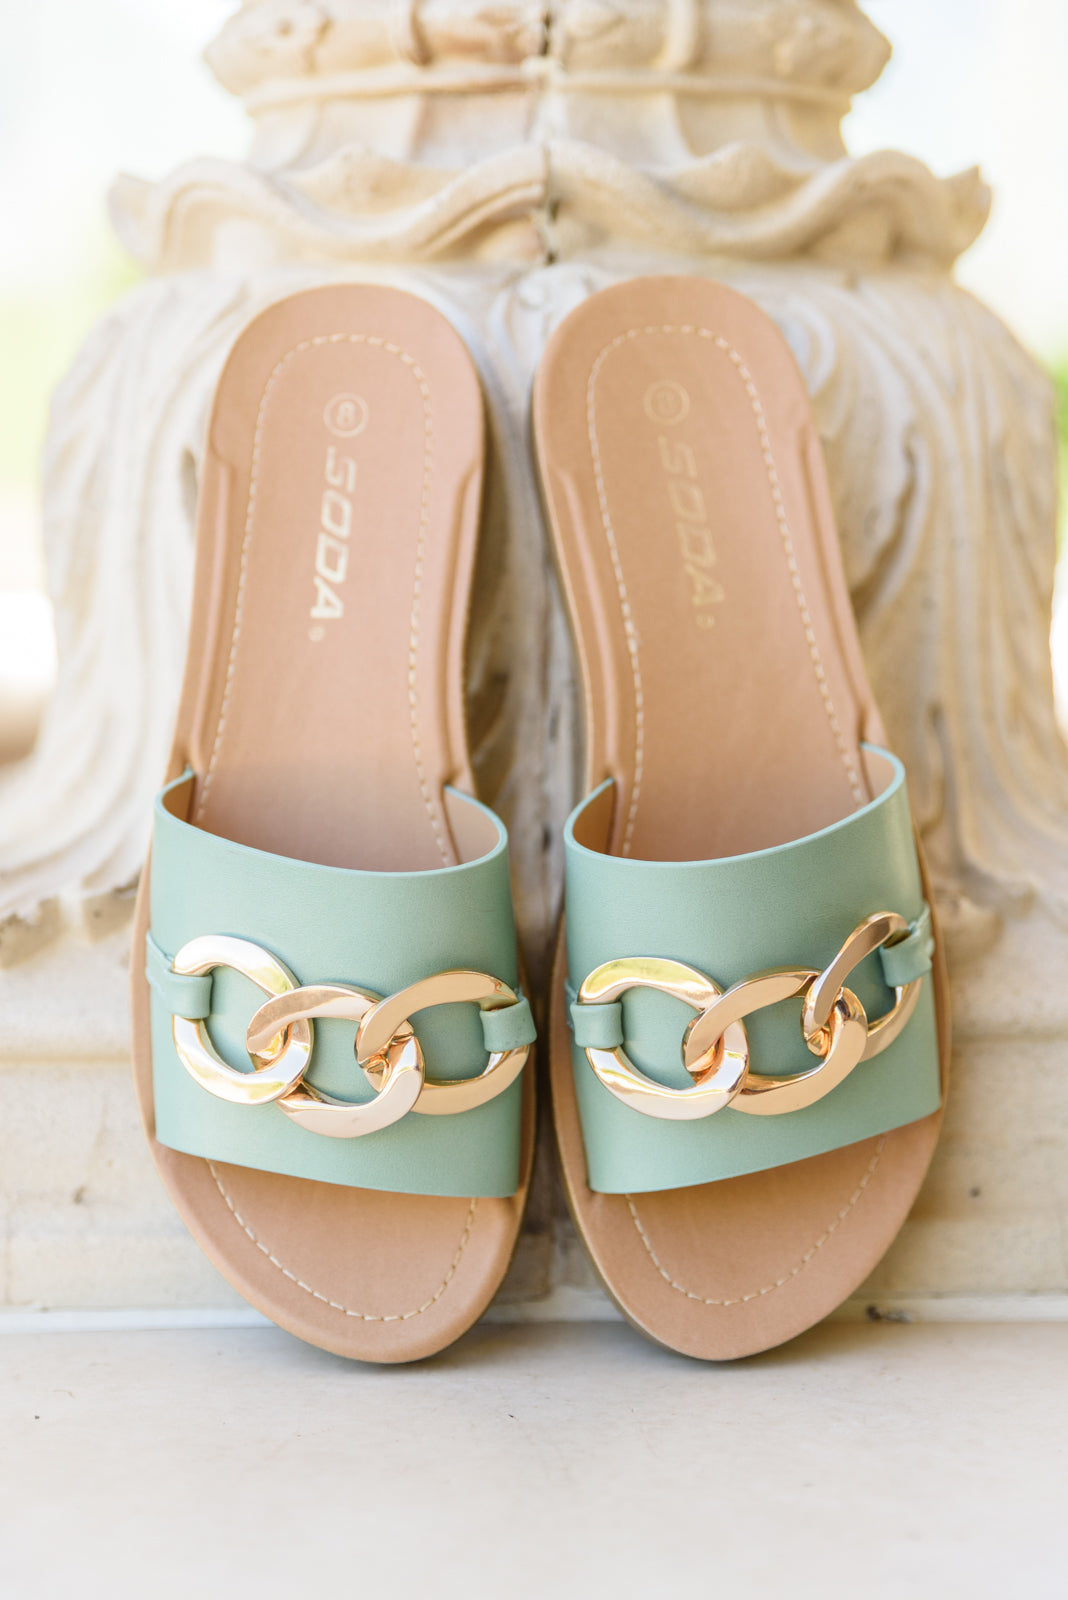 Wander Often Slides in Mint-Shoes- Simply Simpson's Boutique is a Women's Online Fashion Boutique Located in Jupiter, Florida